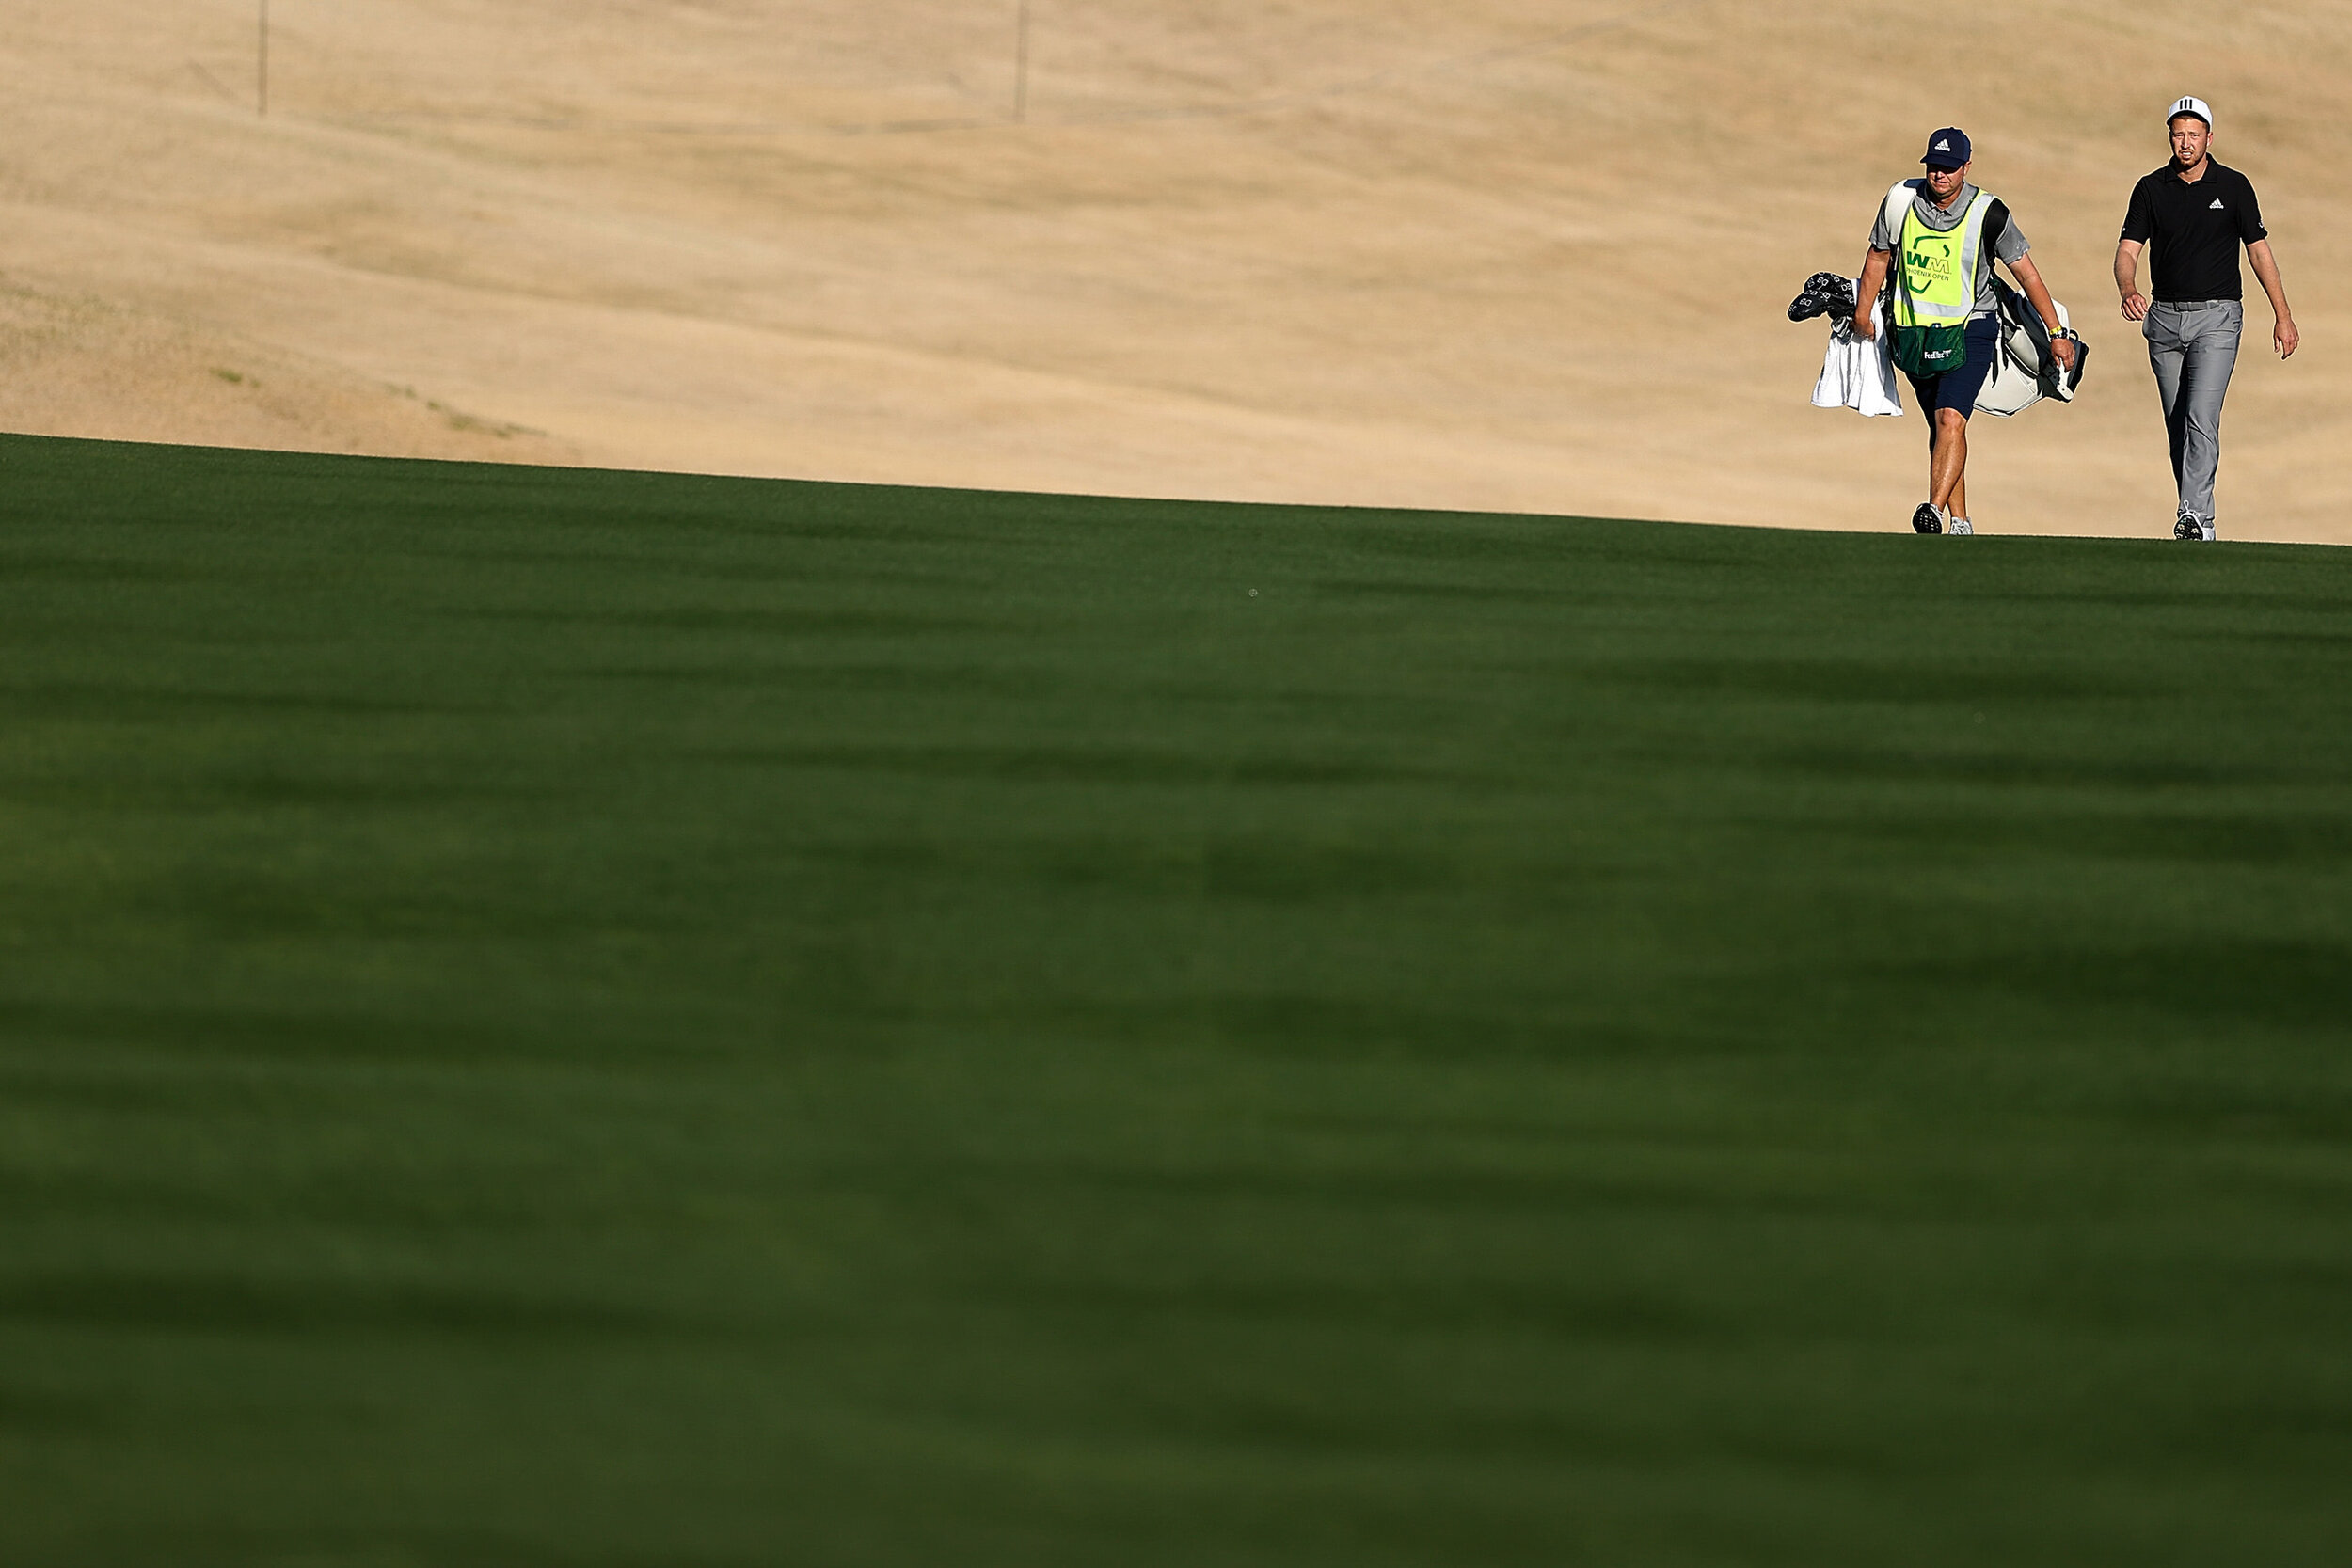  SCOTTSDALE, ARIZONA - FEBRUARY 04: Daniel Berger of the United States walks up the 14th fairway during the first round of the Waste Management Phoenix Open at TPC Scottsdale on February 04, 2021 in Scottsdale, Arizona. (Photo by Christian Petersen/G